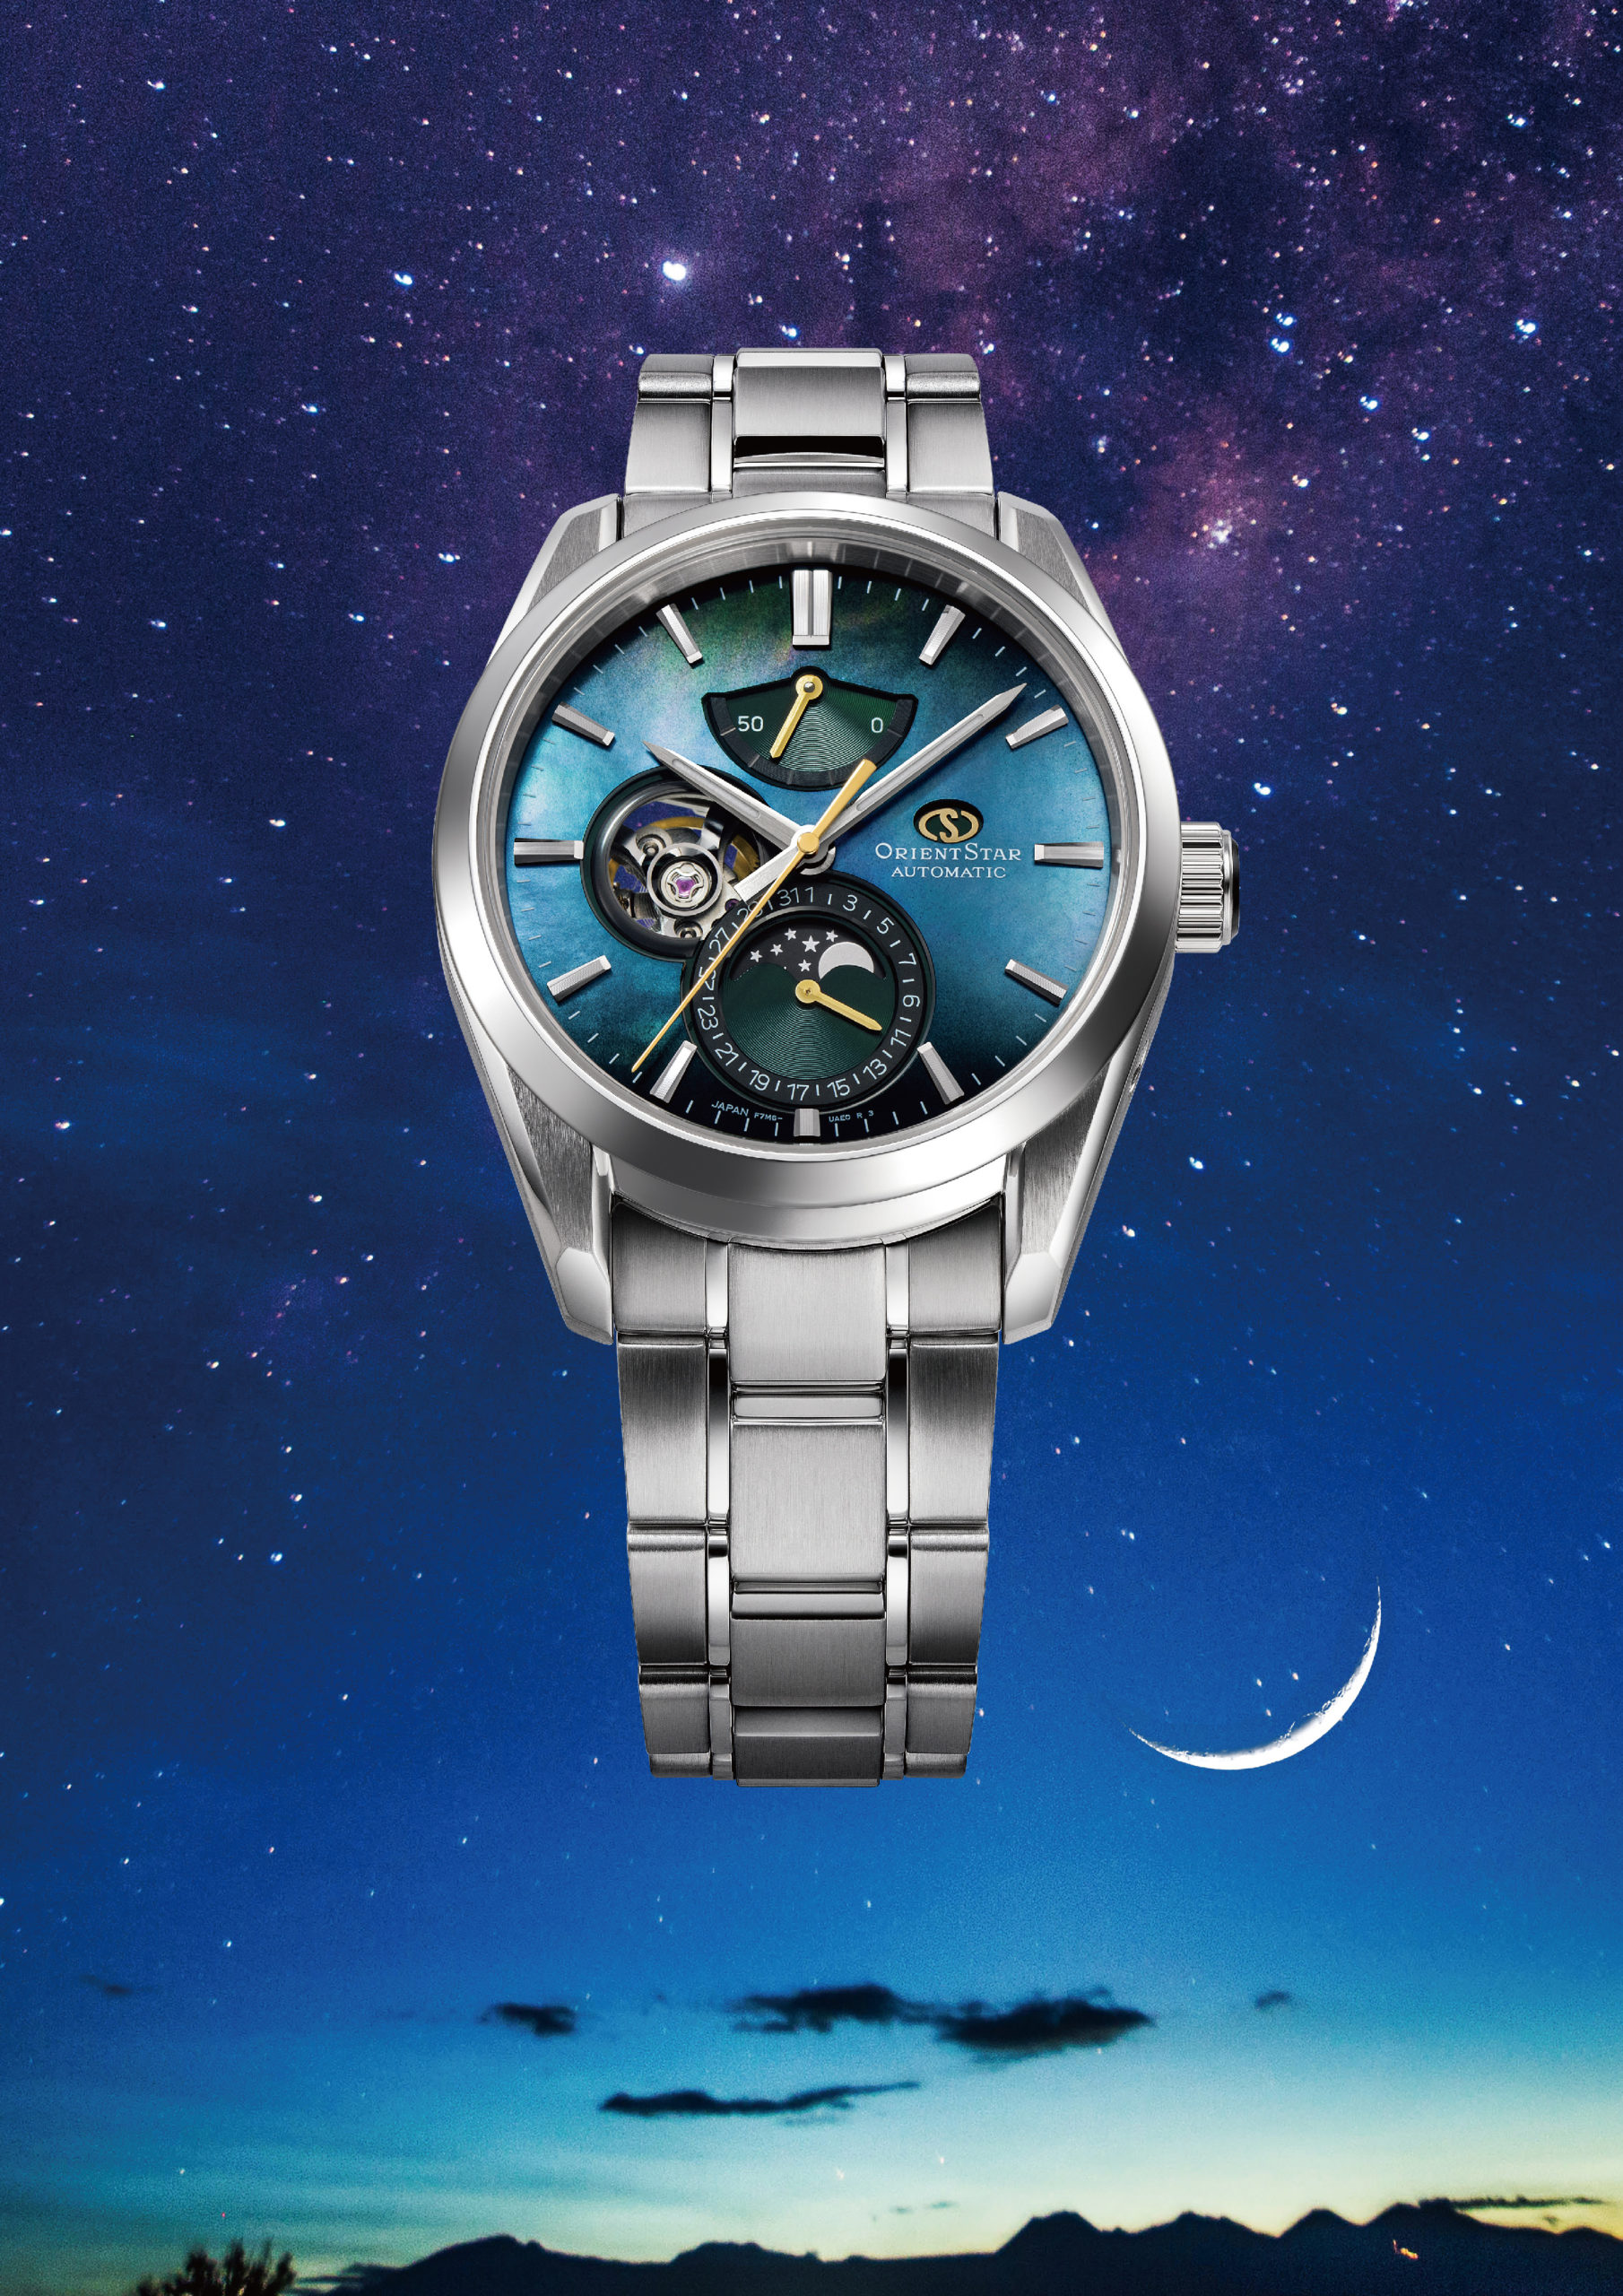 New ORIENT STAR Mechanical Moon Phase watches with nebulainspired mother of pearl dials